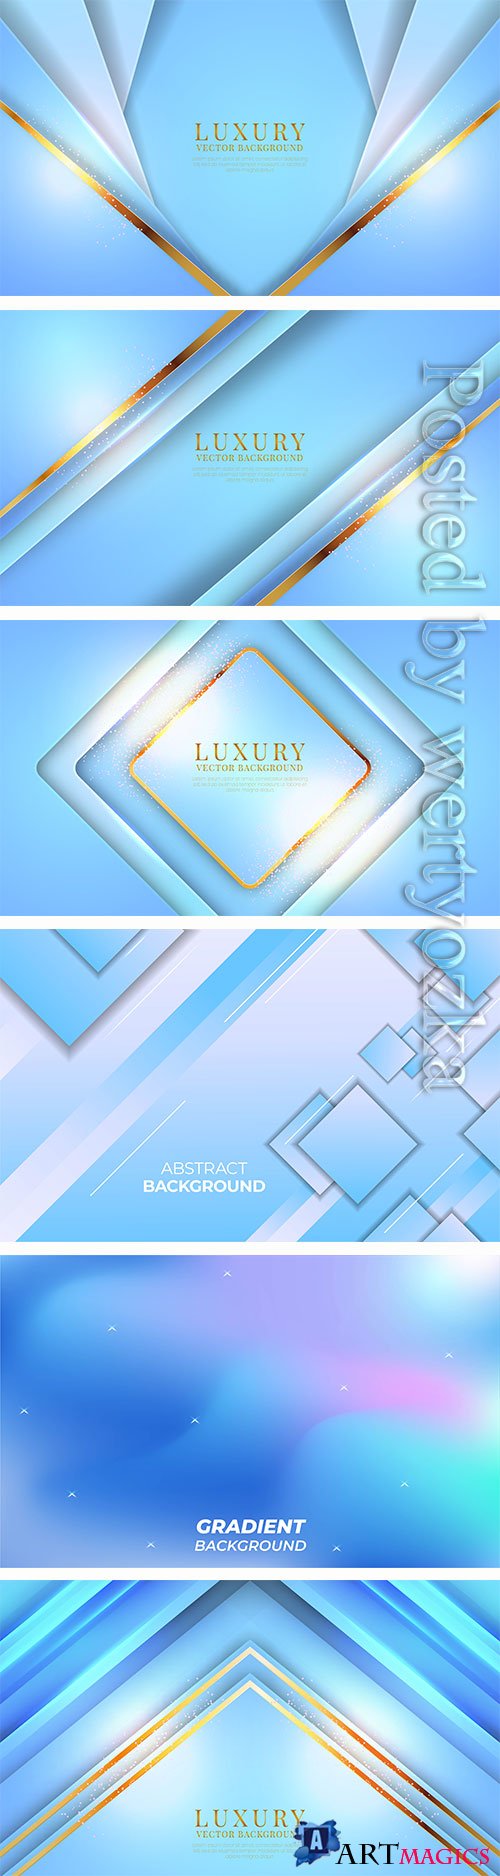 Bblue background with a blue and gold vector texture